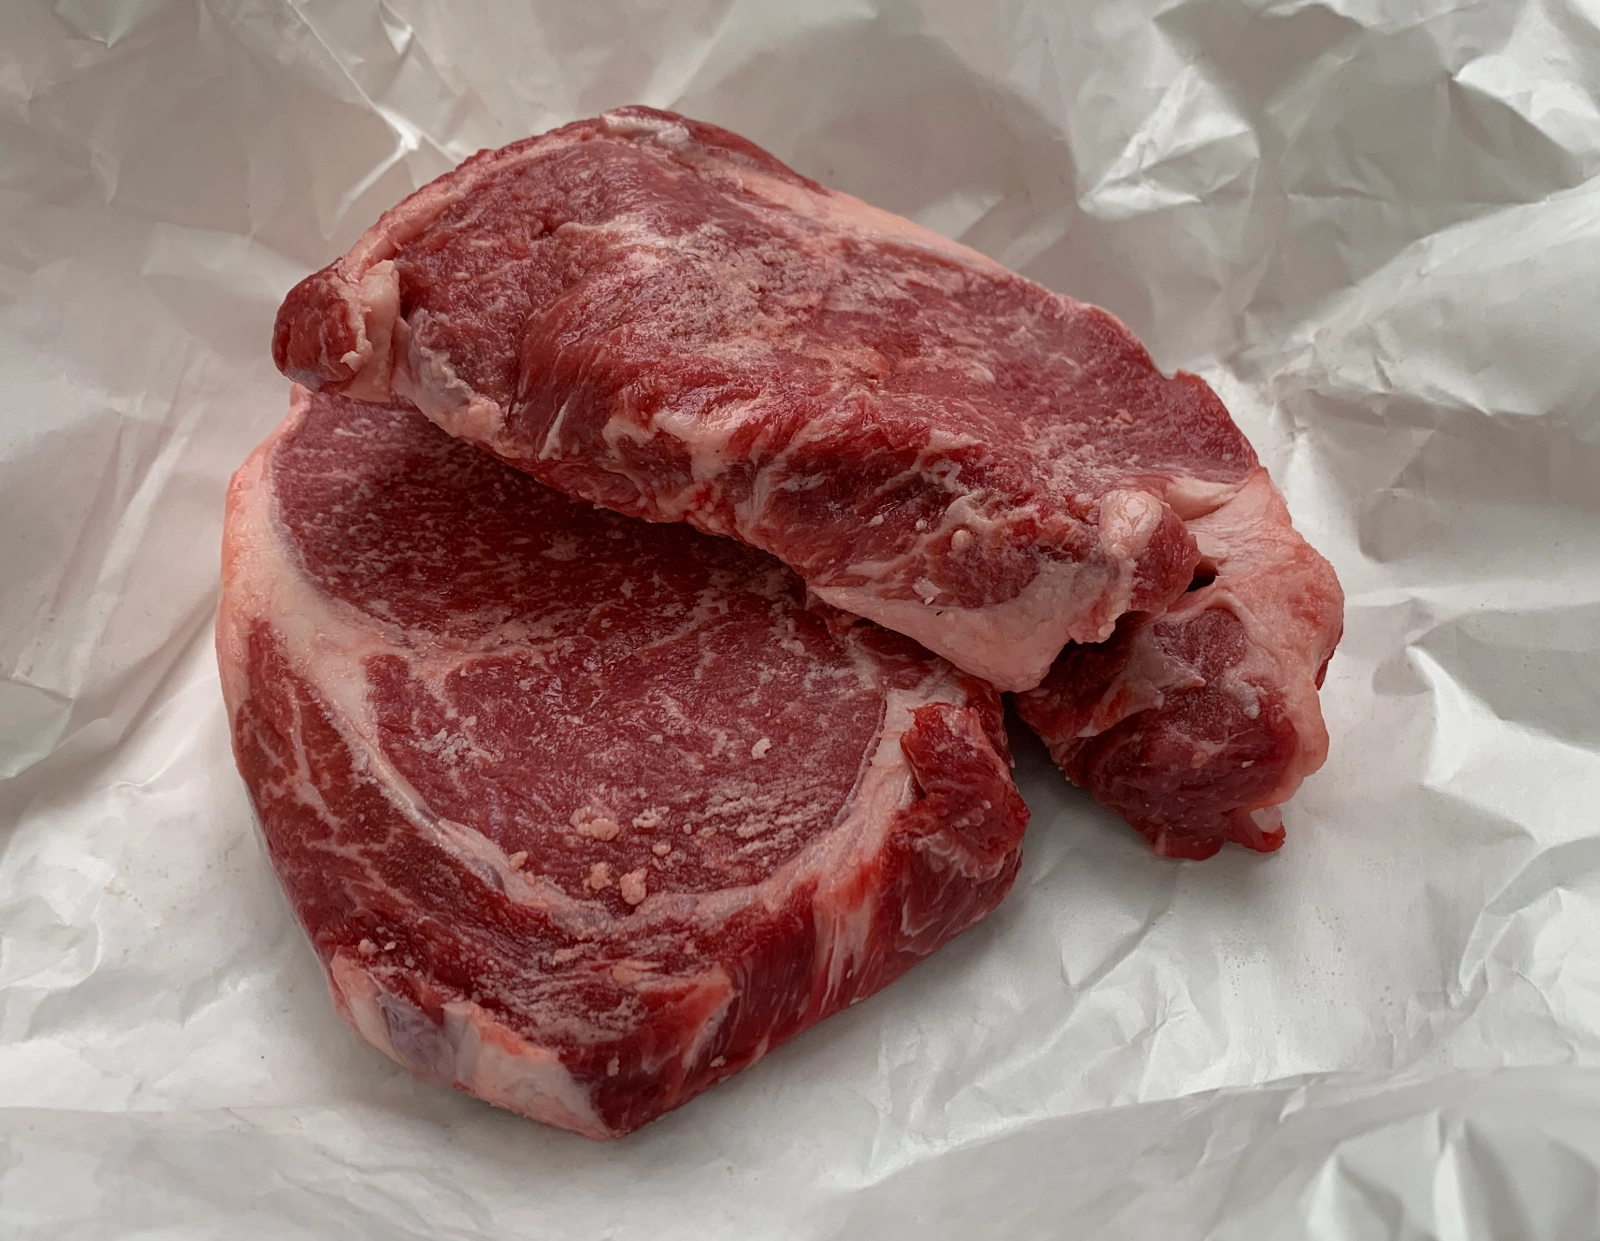 ribeye-steaks-dry-aged-charolais-2-to-a-pack-230-lbs-average-weight